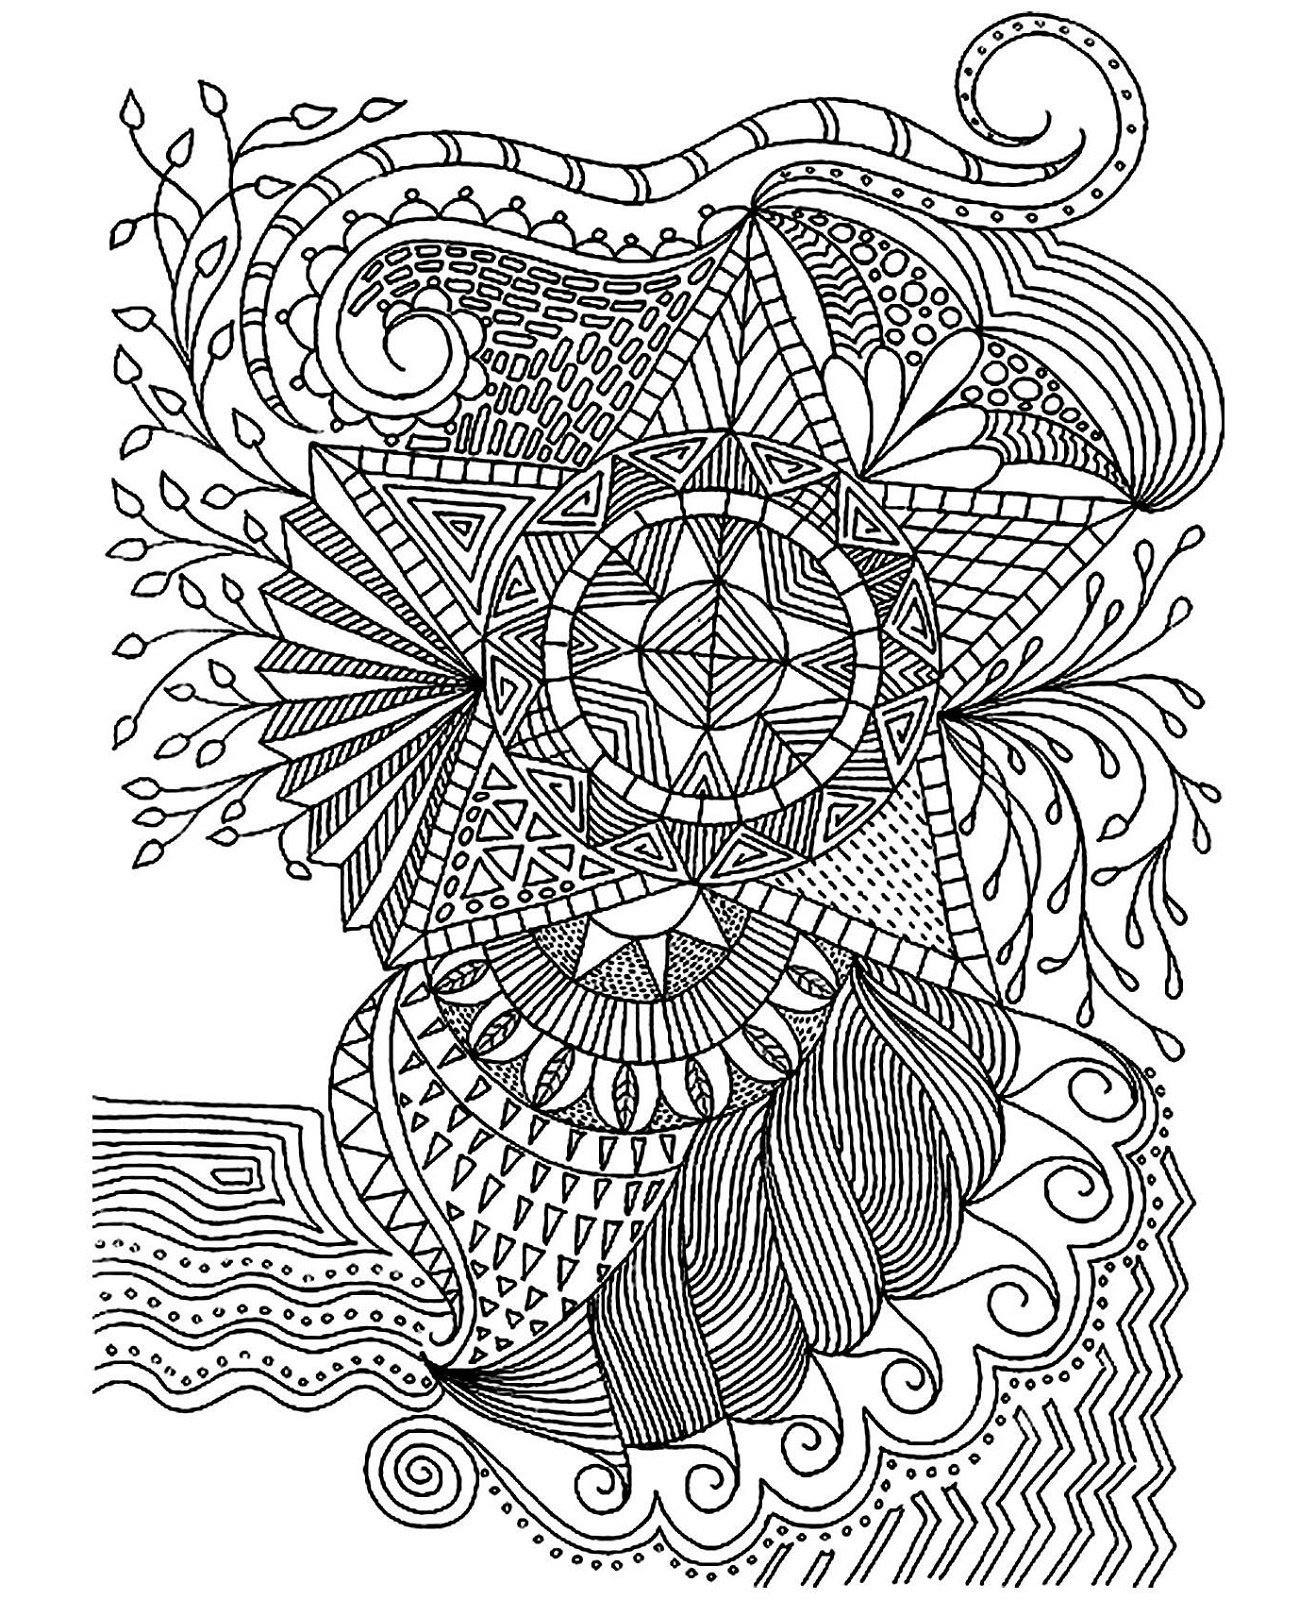 Blissful coloring art therapy for adults